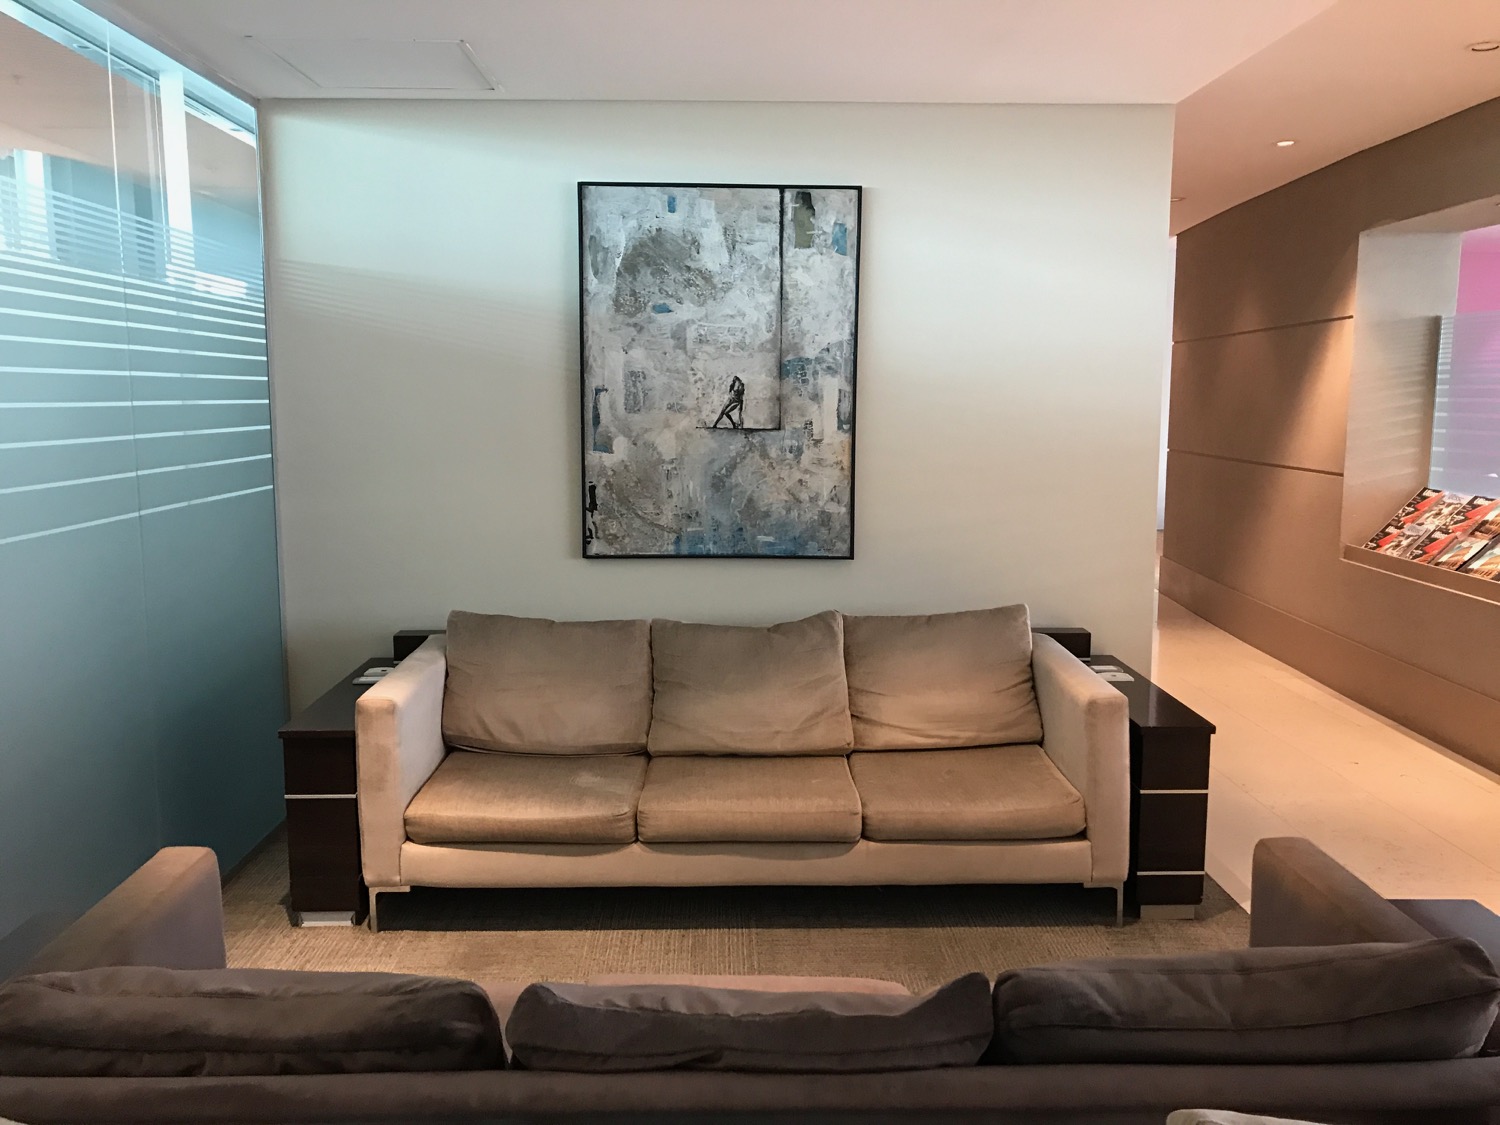 a couches and a painting on the wall